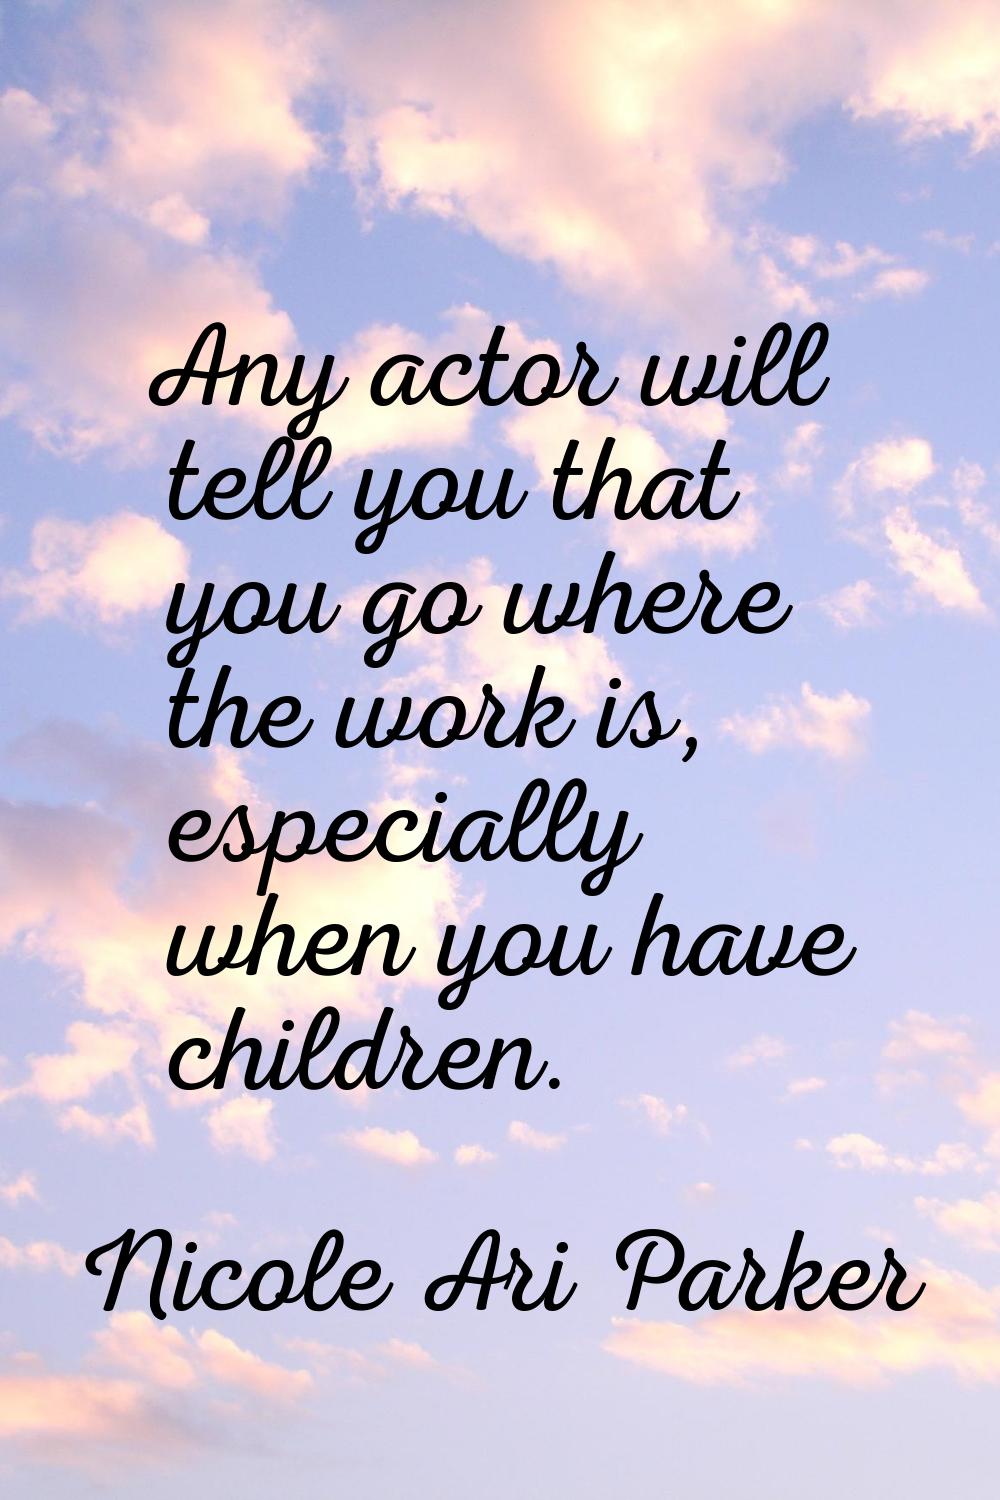 Any actor will tell you that you go where the work is, especially when you have children.